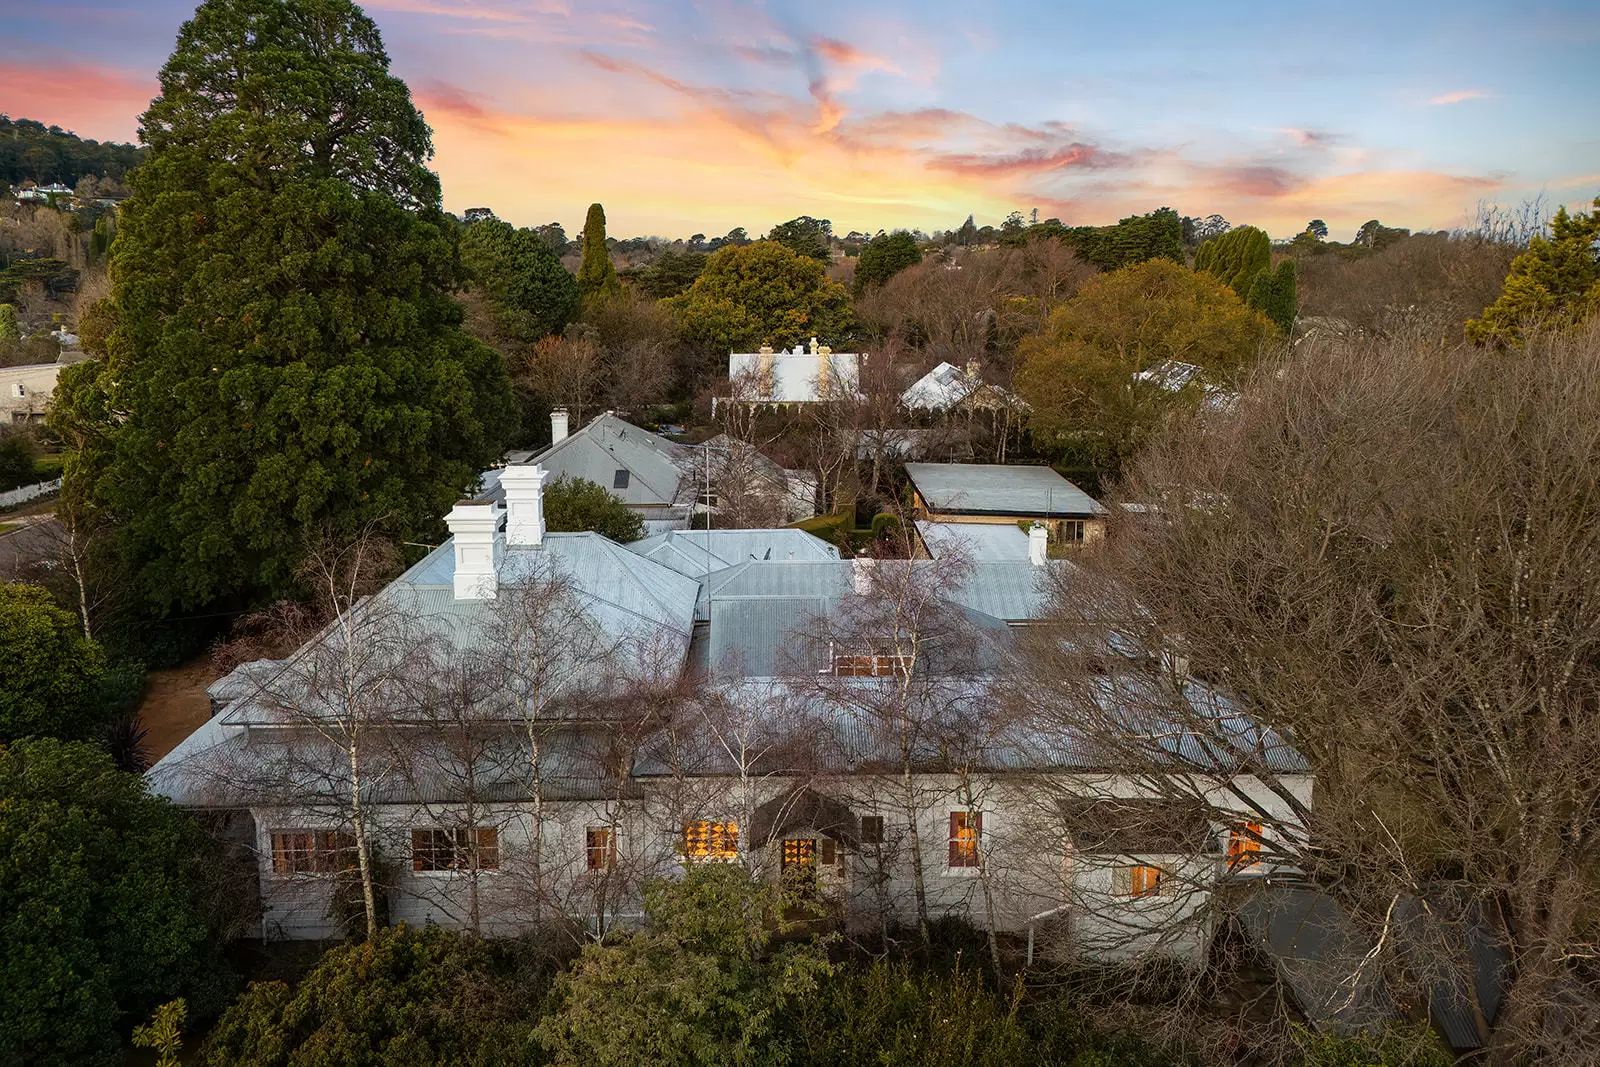 29-31 Merrigang Street, Bowral For Sale by Sydney Sotheby's International Realty - image 26